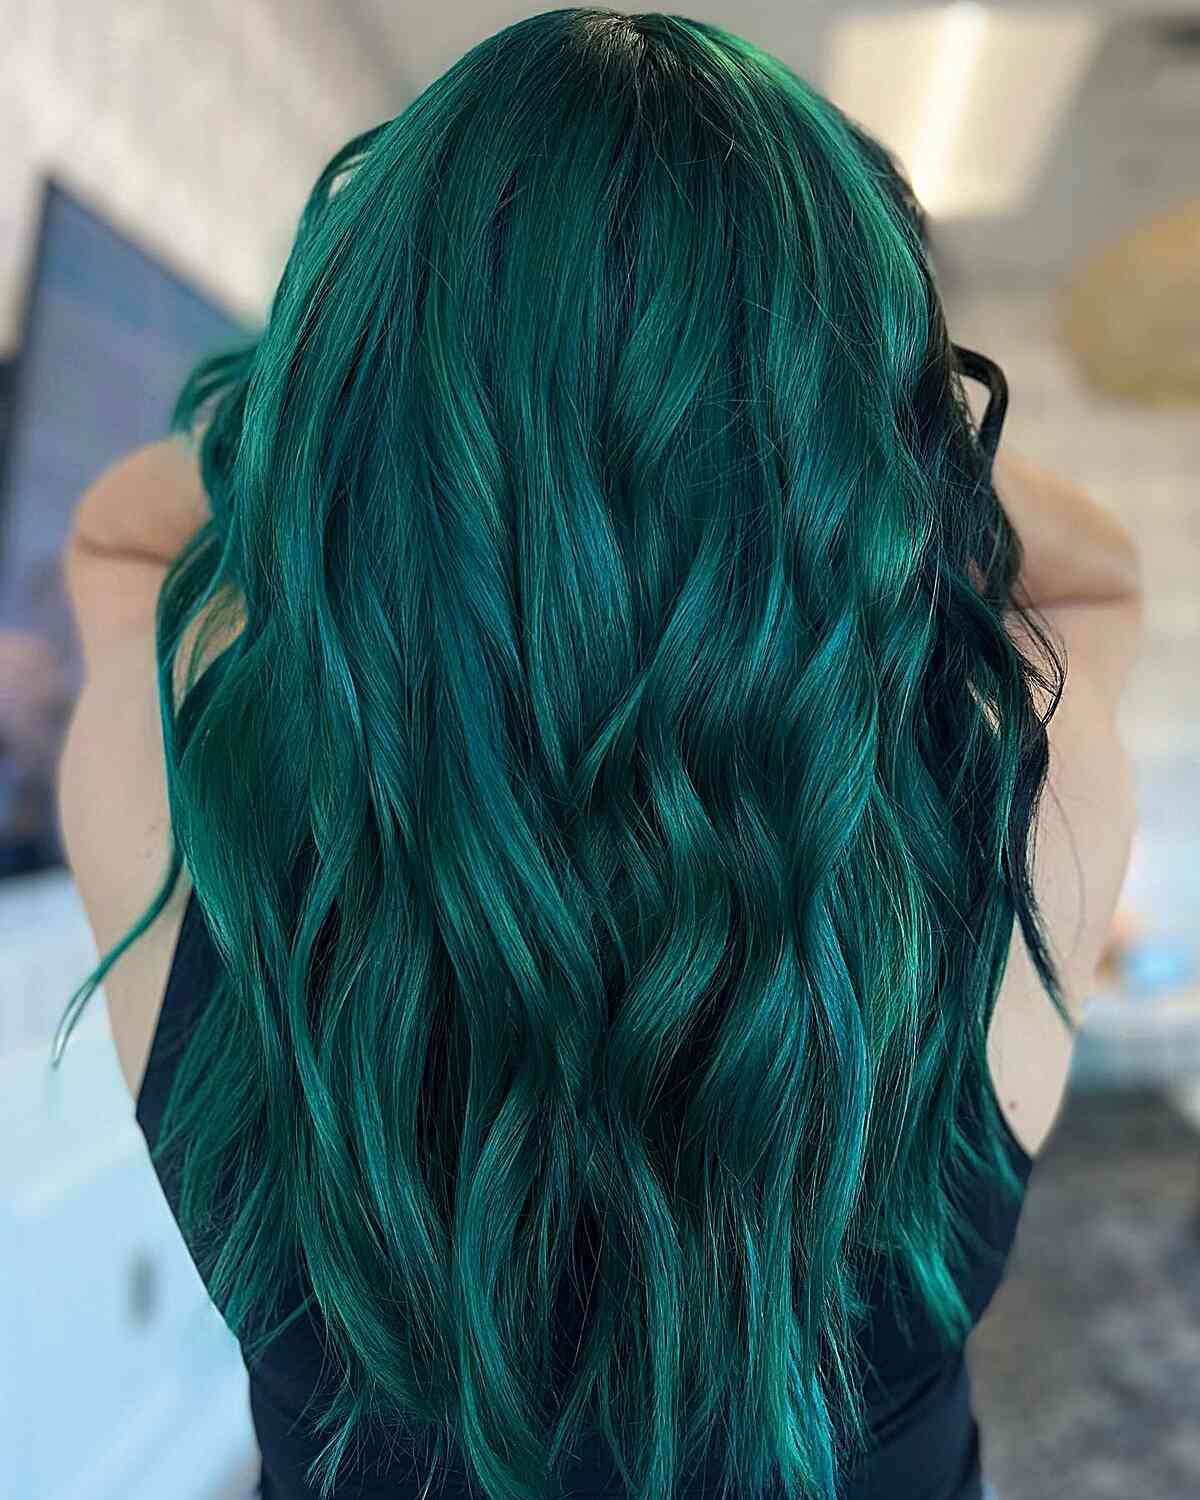 The Ideal Shade of Emerald Green Hair